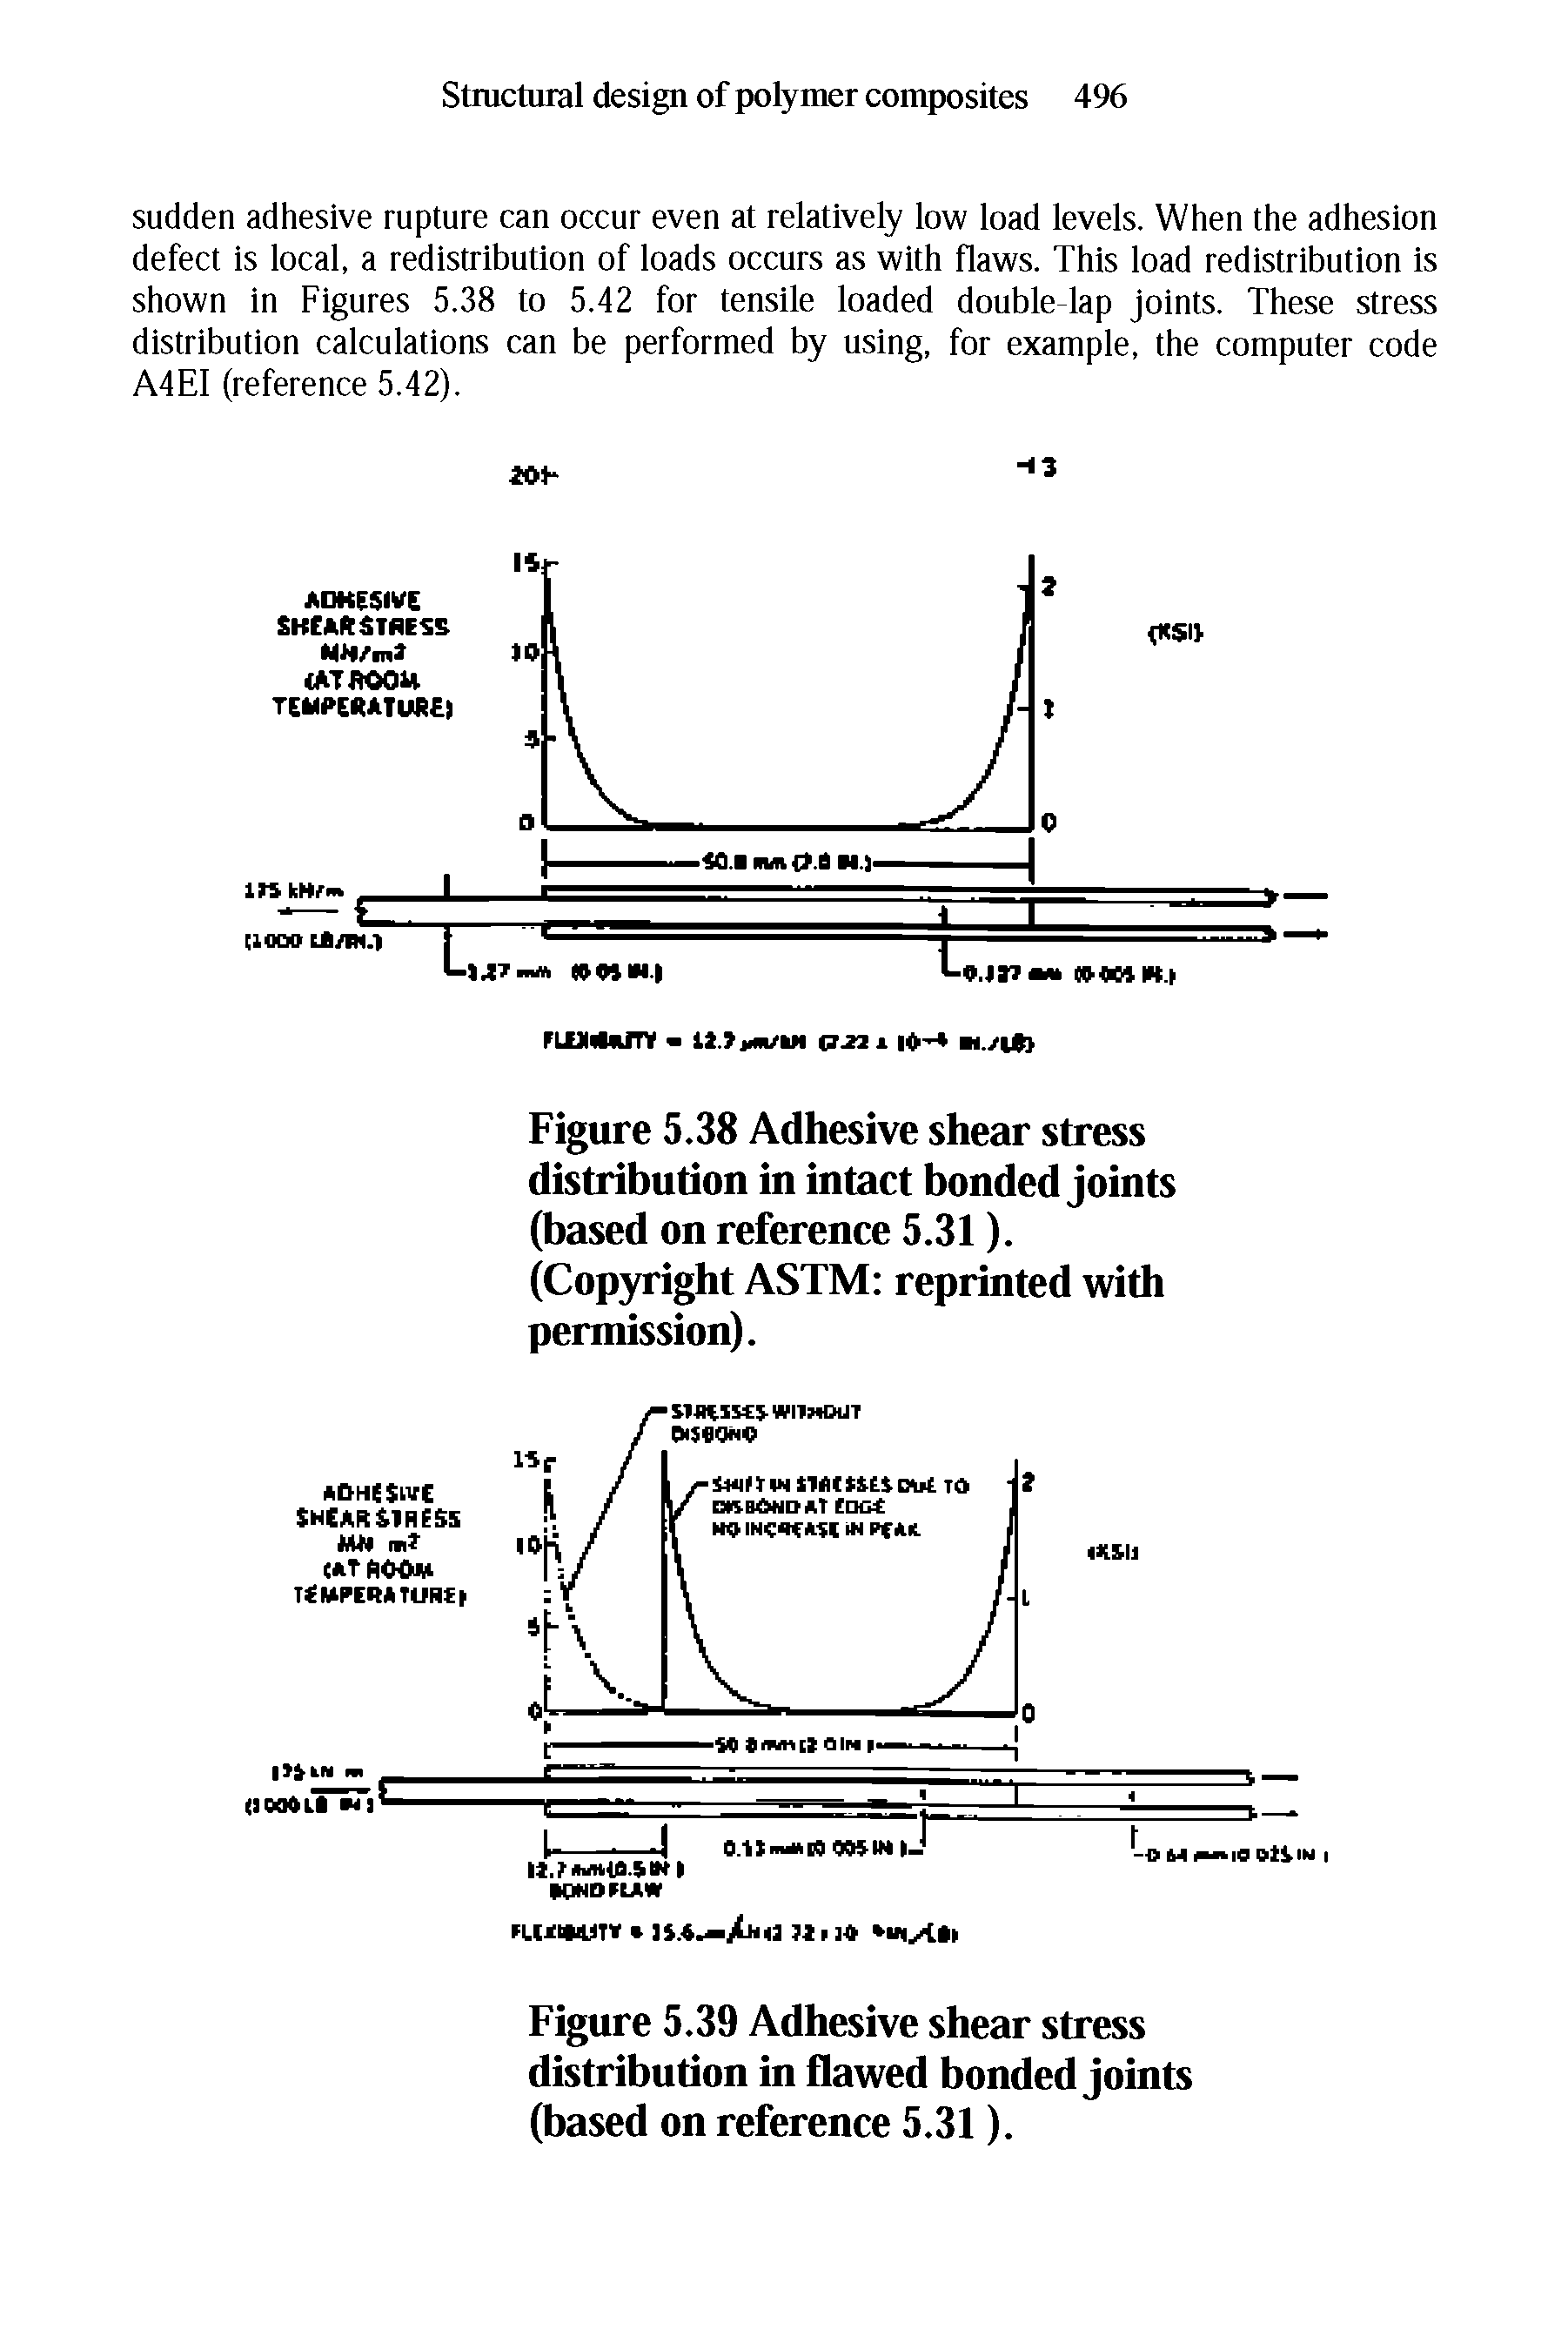 Figure 5.38 Adhesive shear stress distribution in intact bonded joints (based on reference 5.31). (Copyright ASTM reprinted with permission).